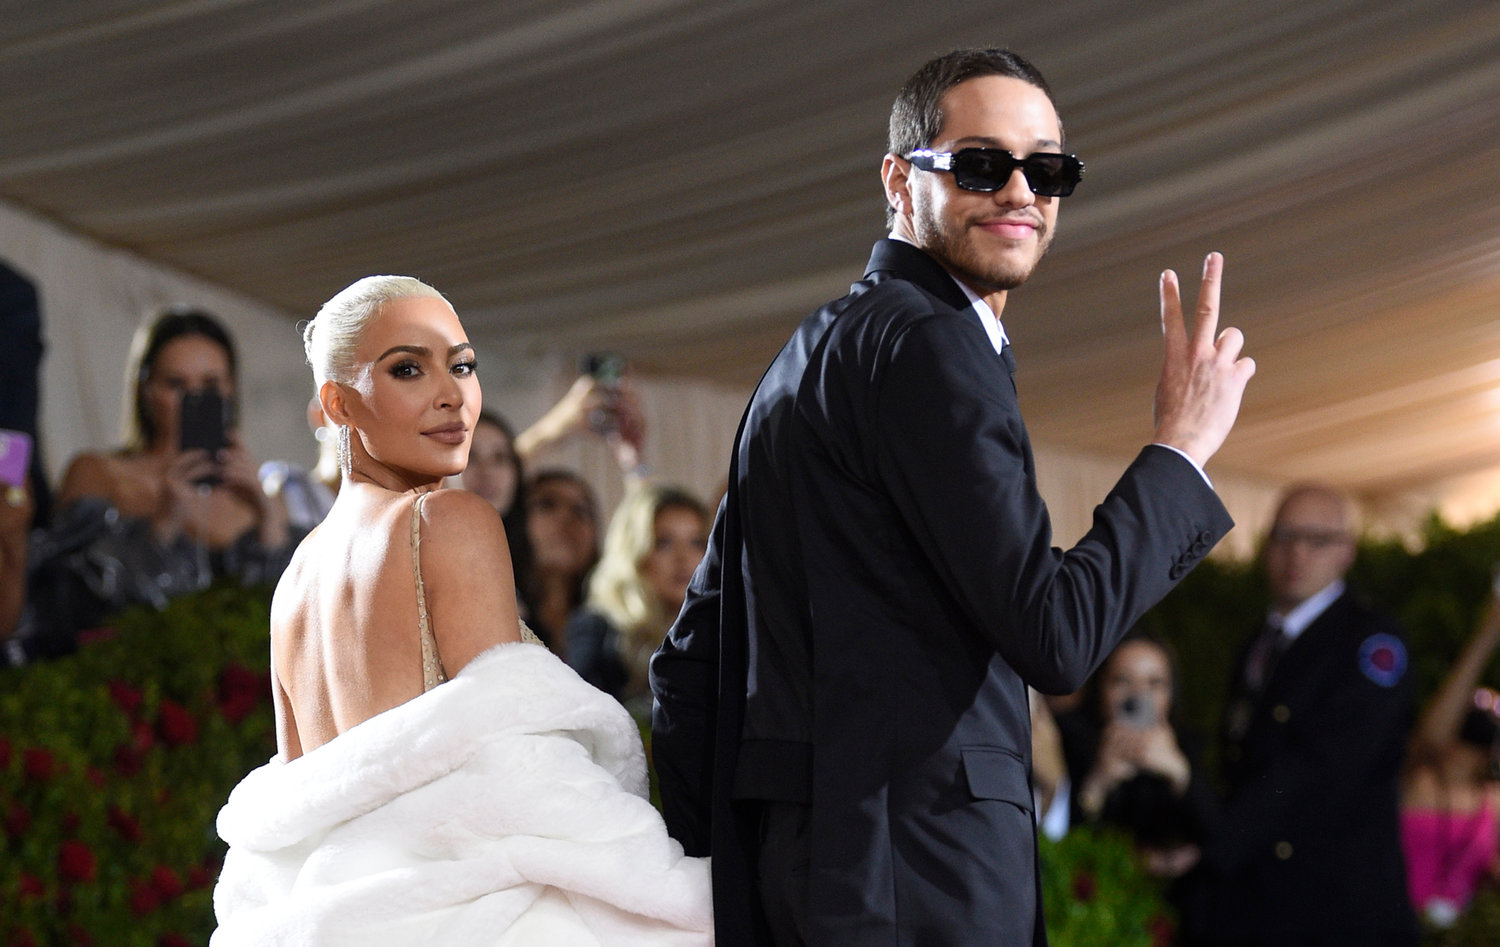 FILE - Kim Kardashian, left, and Pete Davidson attend The Metropolitan Museum of Art's Costume Institute benefit gala celebrating the opening of the "In America: An Anthology of Fashion" exhibition on May 2, 2022, in New York. (Photo by Evan Agostini/Invision/AP, File)